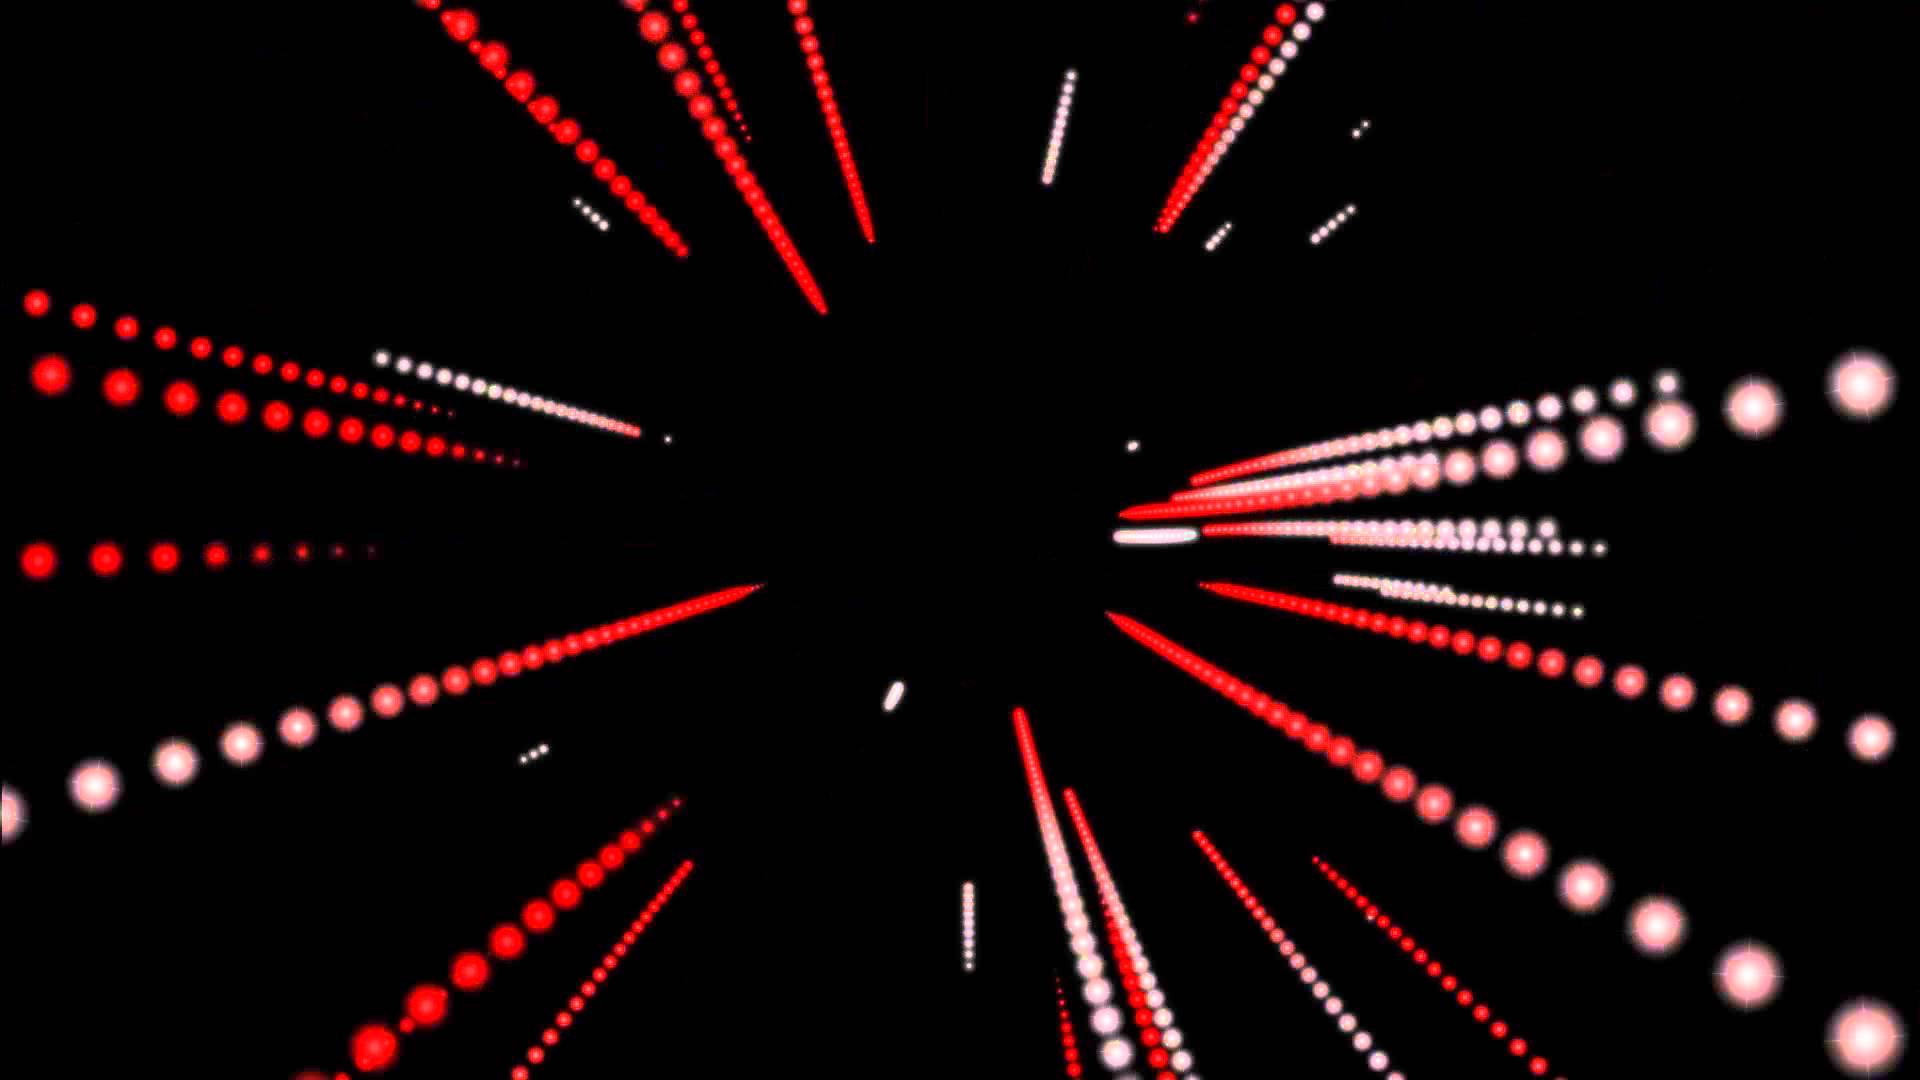 Red Laser ANIMATION Black Background FREE FOOTAGE HD - YouTube